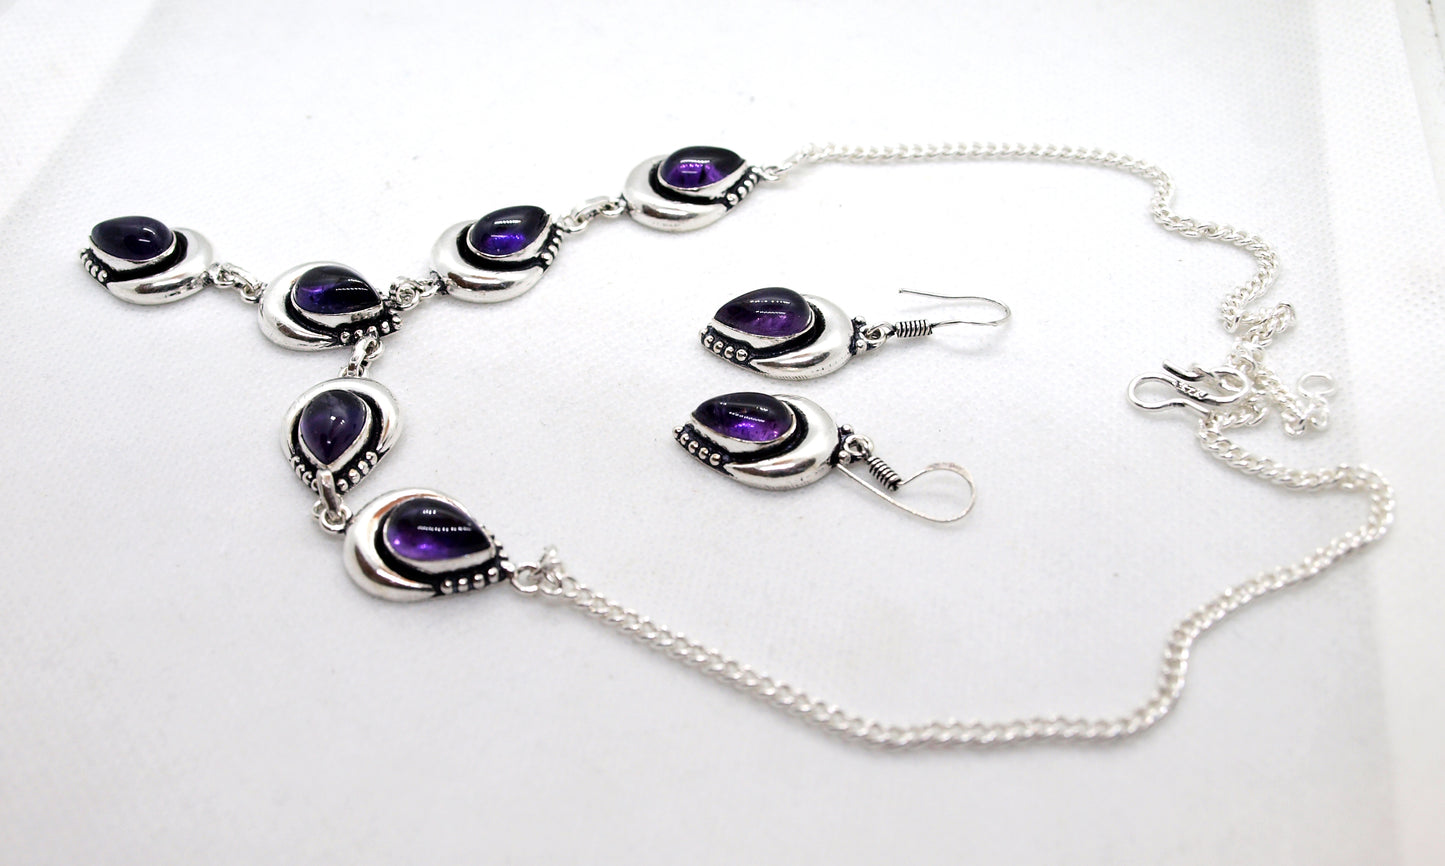 Amethyst necklace and earrings set